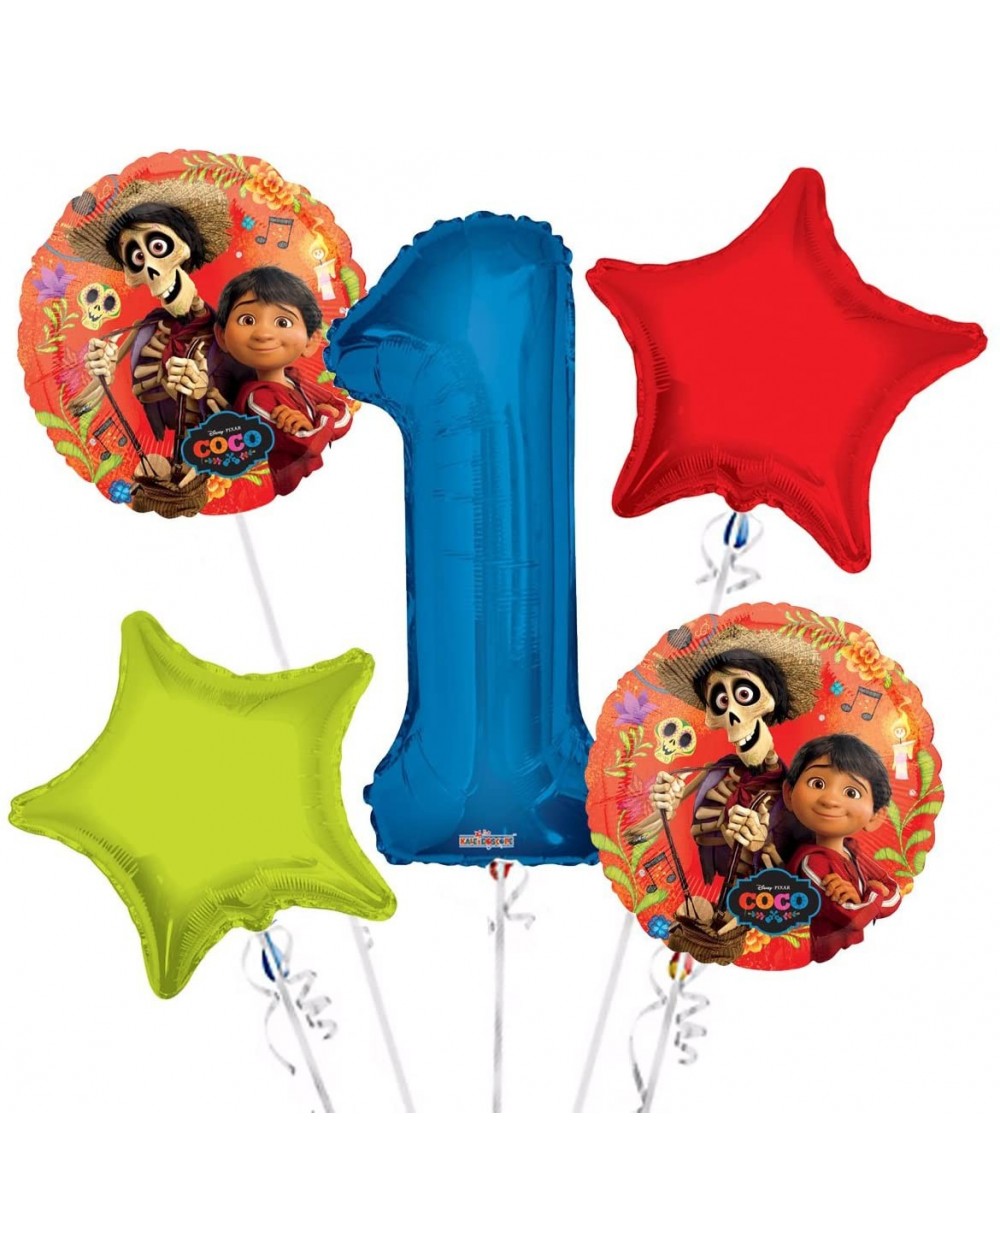 Balloons Coco Hector Balloon Bouquet 1st Birthday 5 pcs - Party Supplies - CU18C77KQHQ $11.66